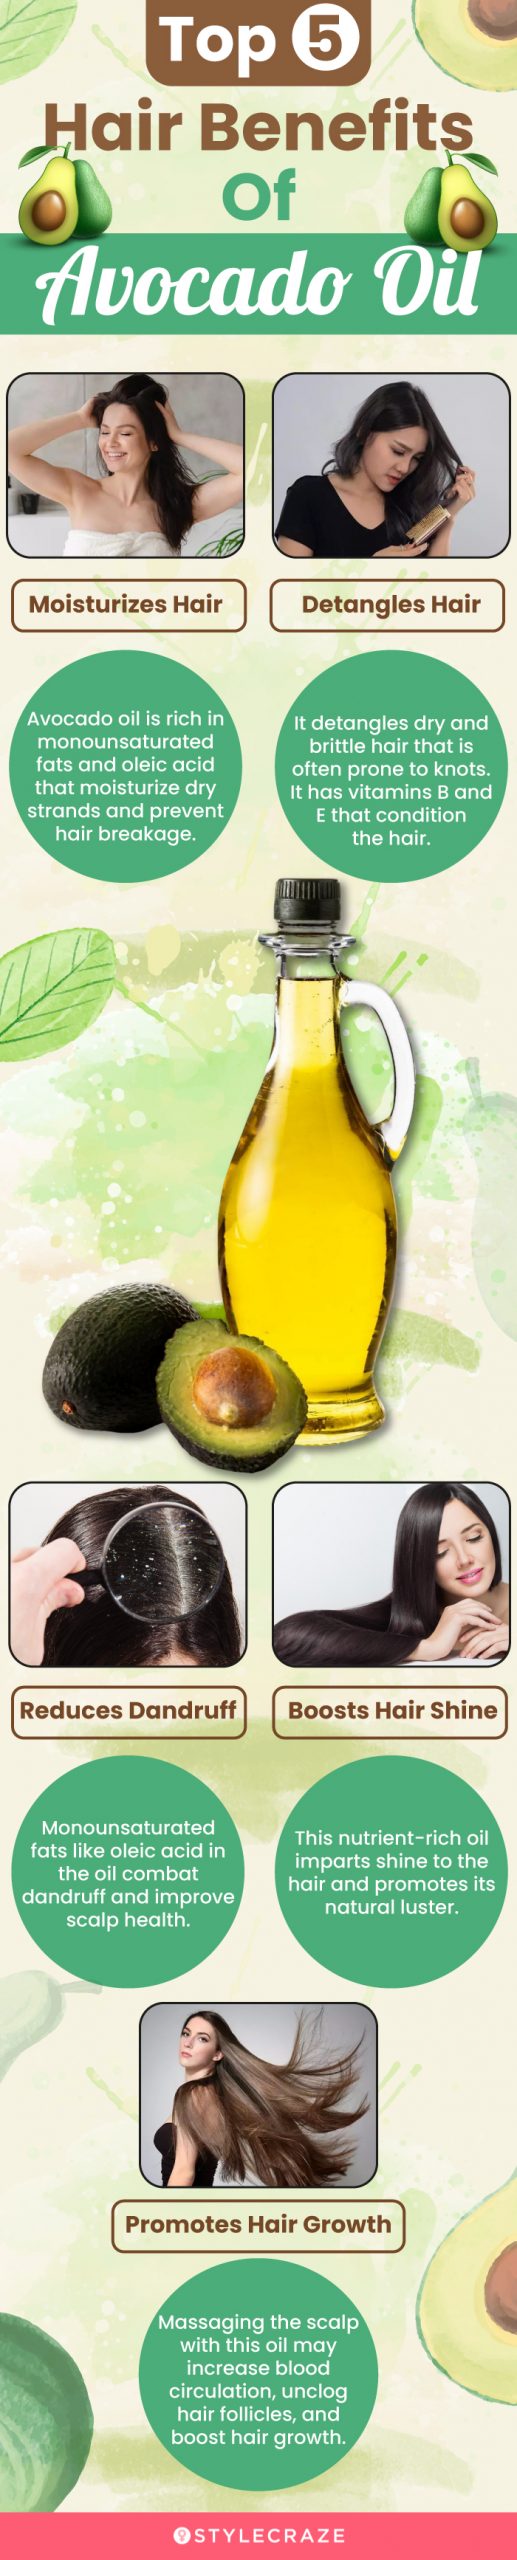 How to Use Avocado Oil for Skin Care - Carrier Oil Spotlight | Avocado oil  skin, Oils for skin, Avocado oil benefits